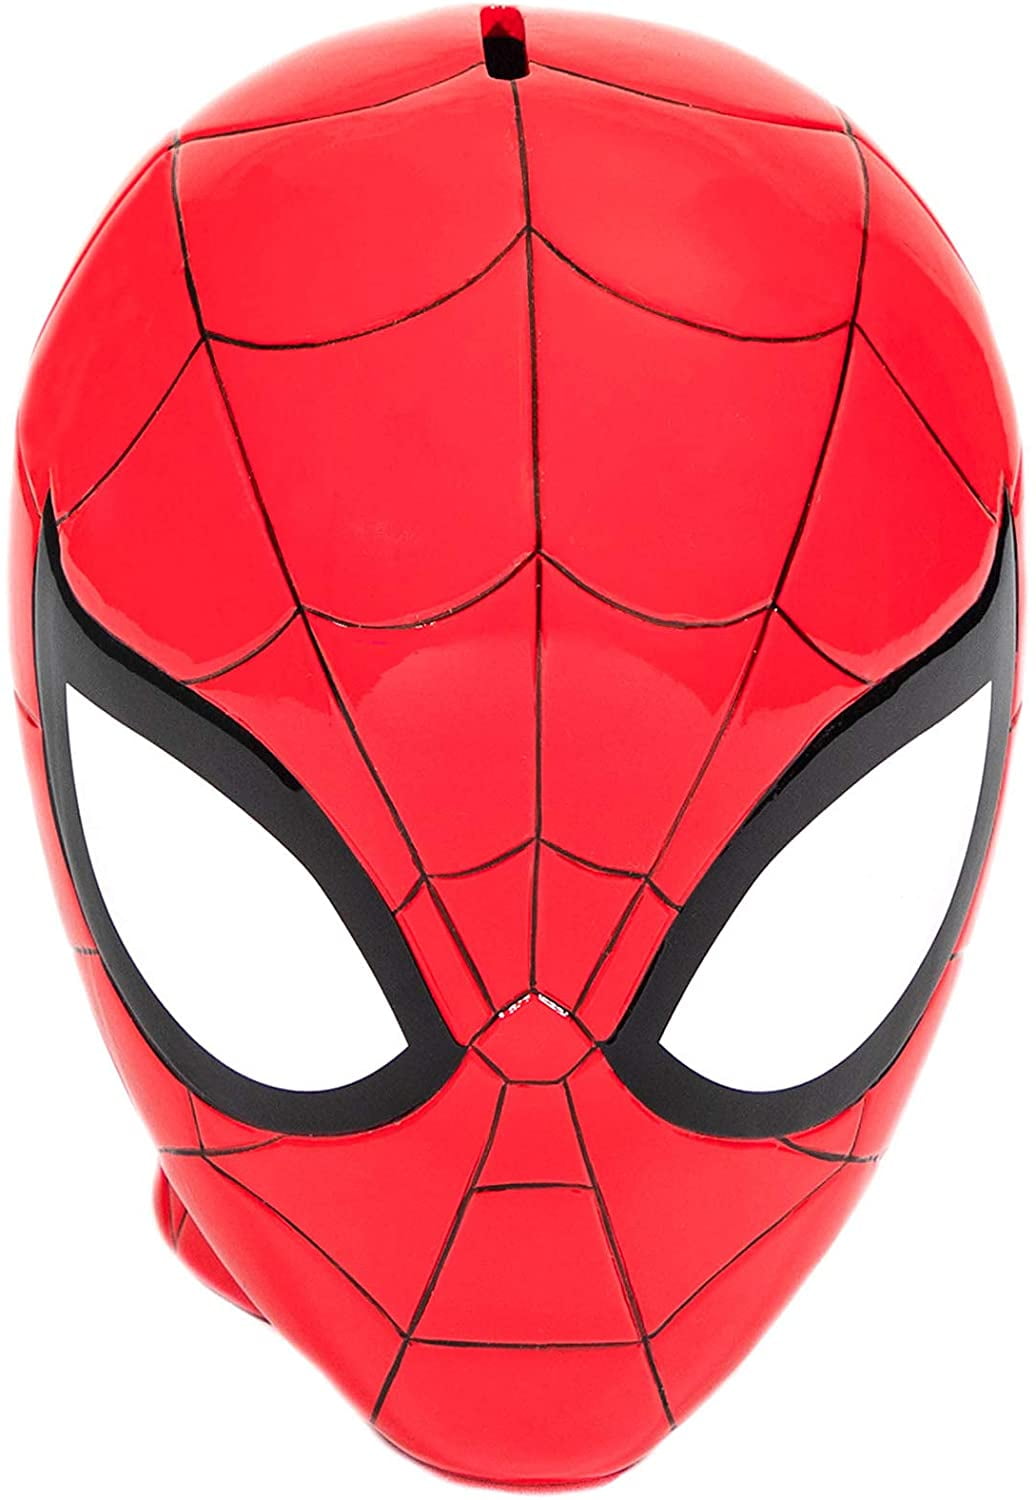 MARVEL Comics SPIDERMAN BUST COIN BANK  NEW 